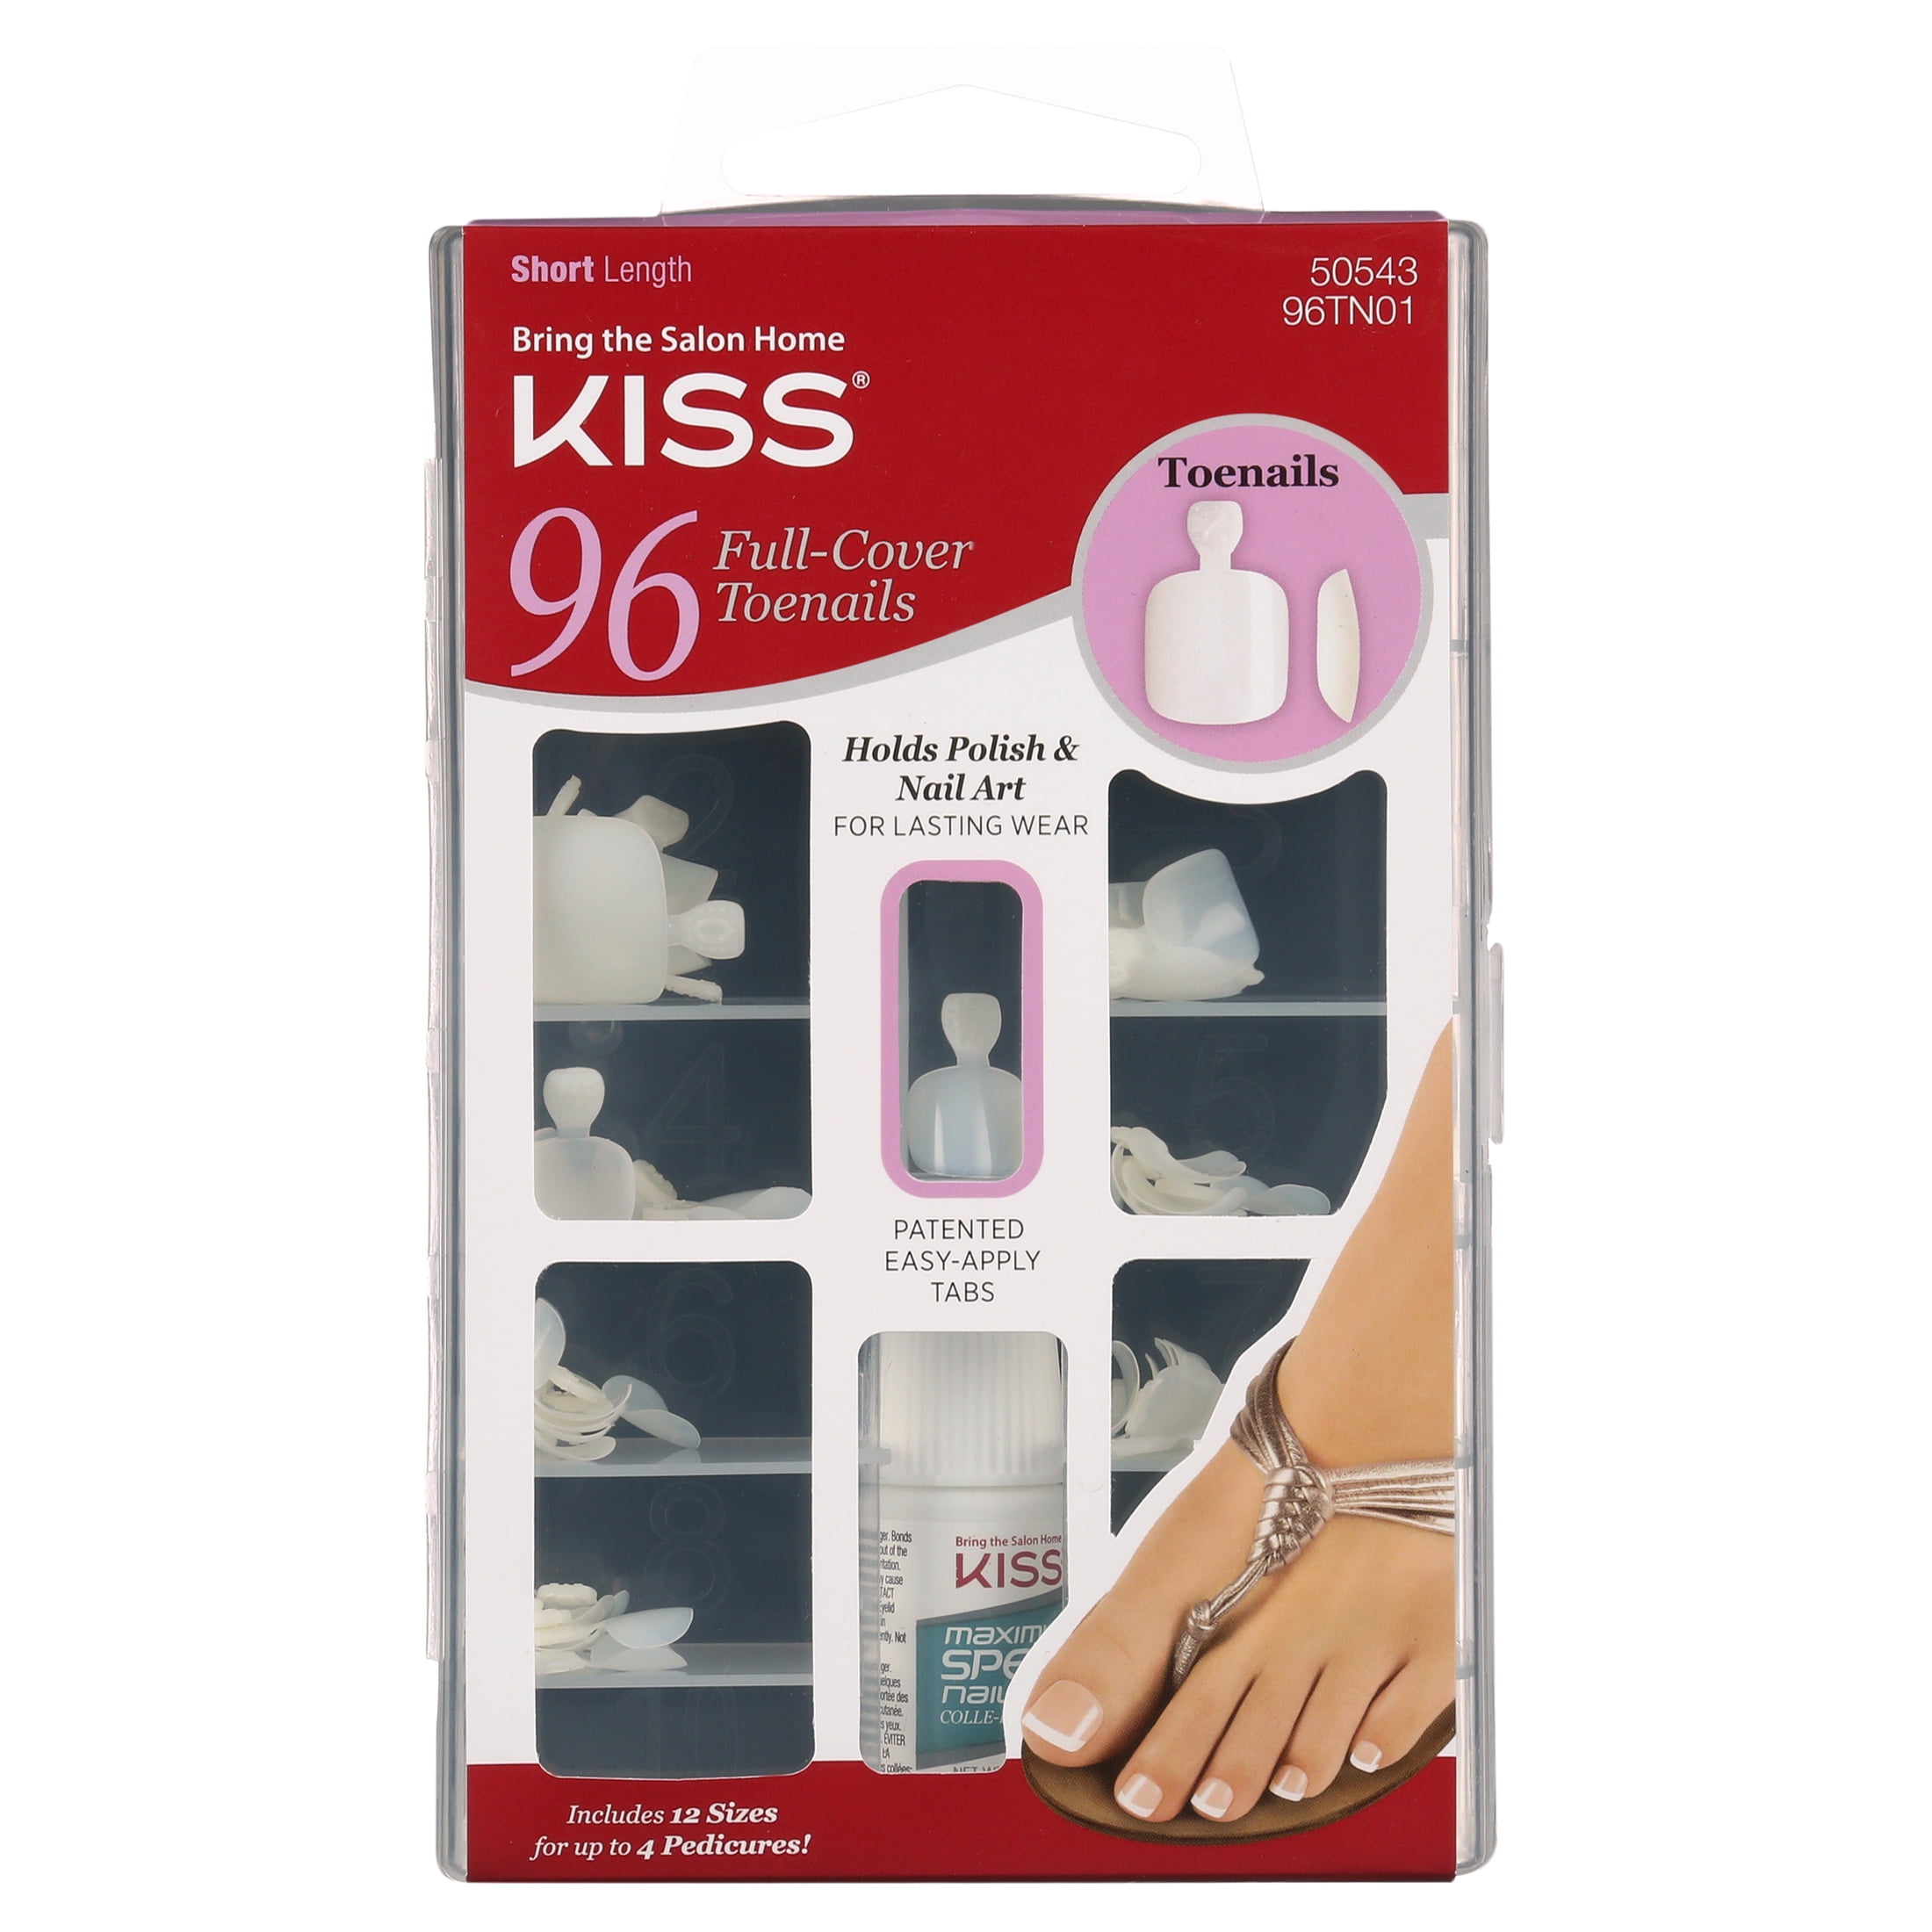 KISS Full-Cover Fake Toenails with Patented Easy-Apply Tabs & Maximum  Strength Nail Glue - 96 Count 